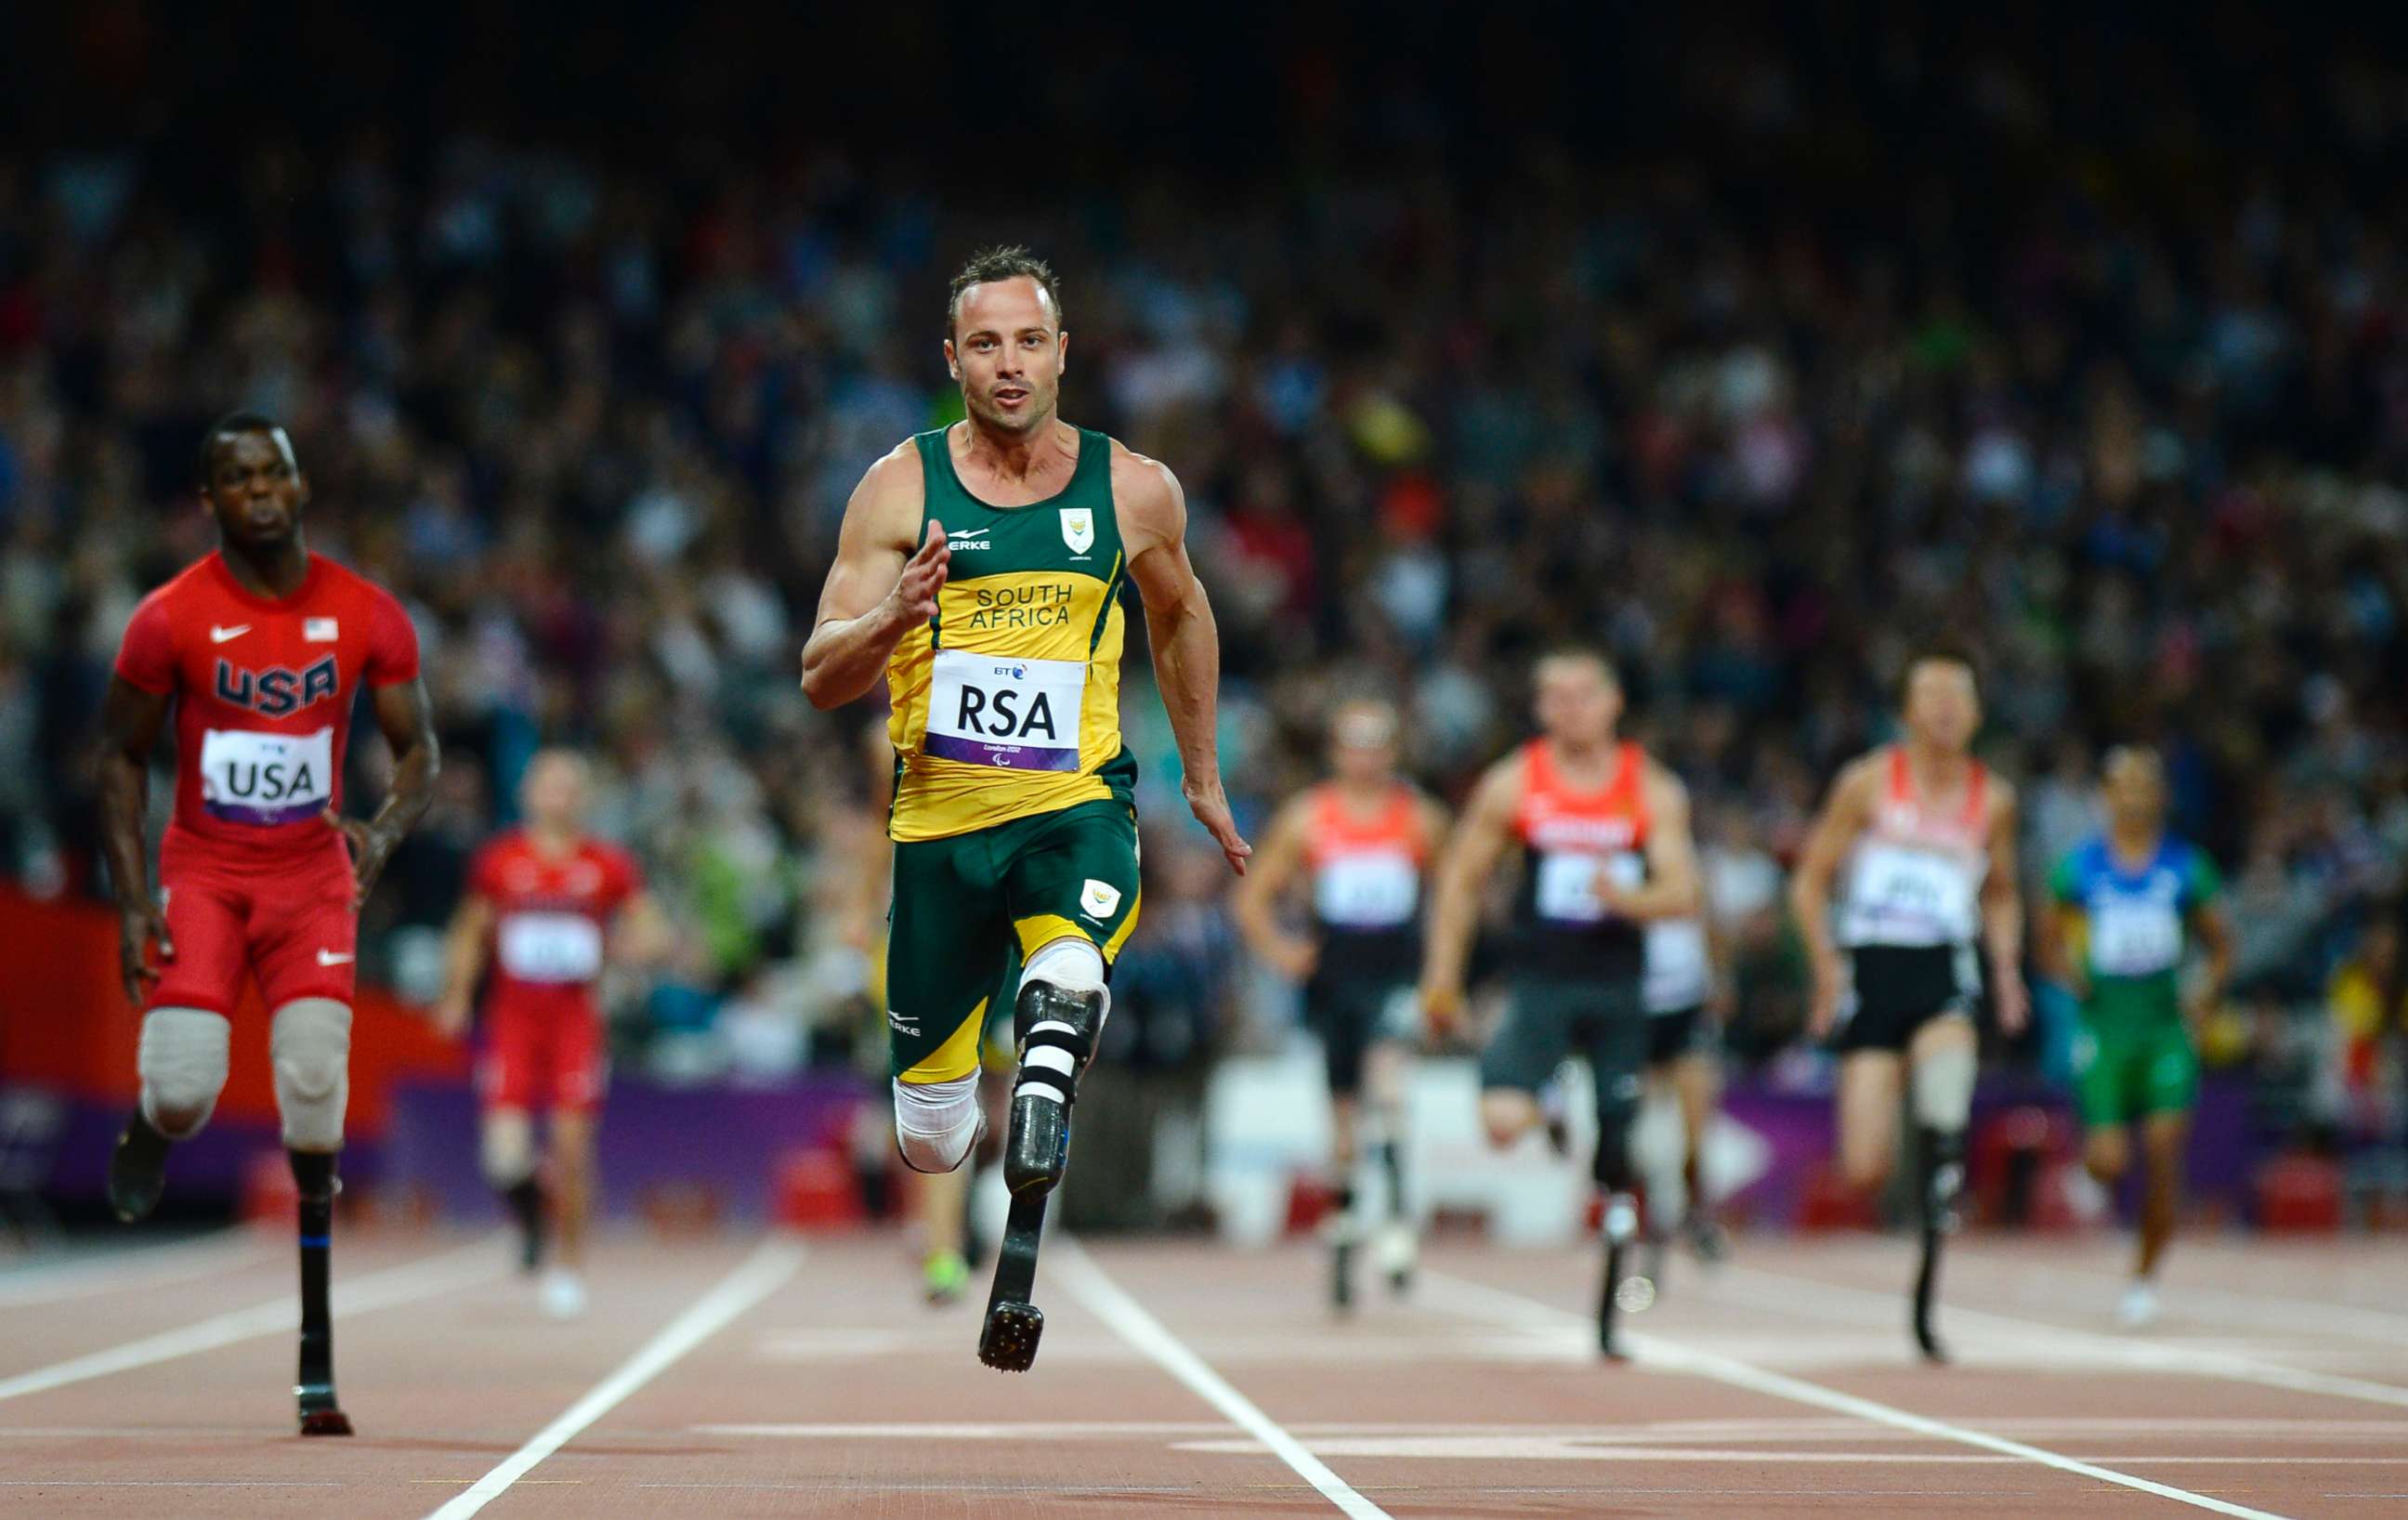 PHOTO:South Africa's Oscar Pistorius runs across the finish line as he anchors his team home during the athletics competition at the London 2012 Paralympic Games at the Olympic Stadium in east London in this Sept. 5, 2012 file photo.